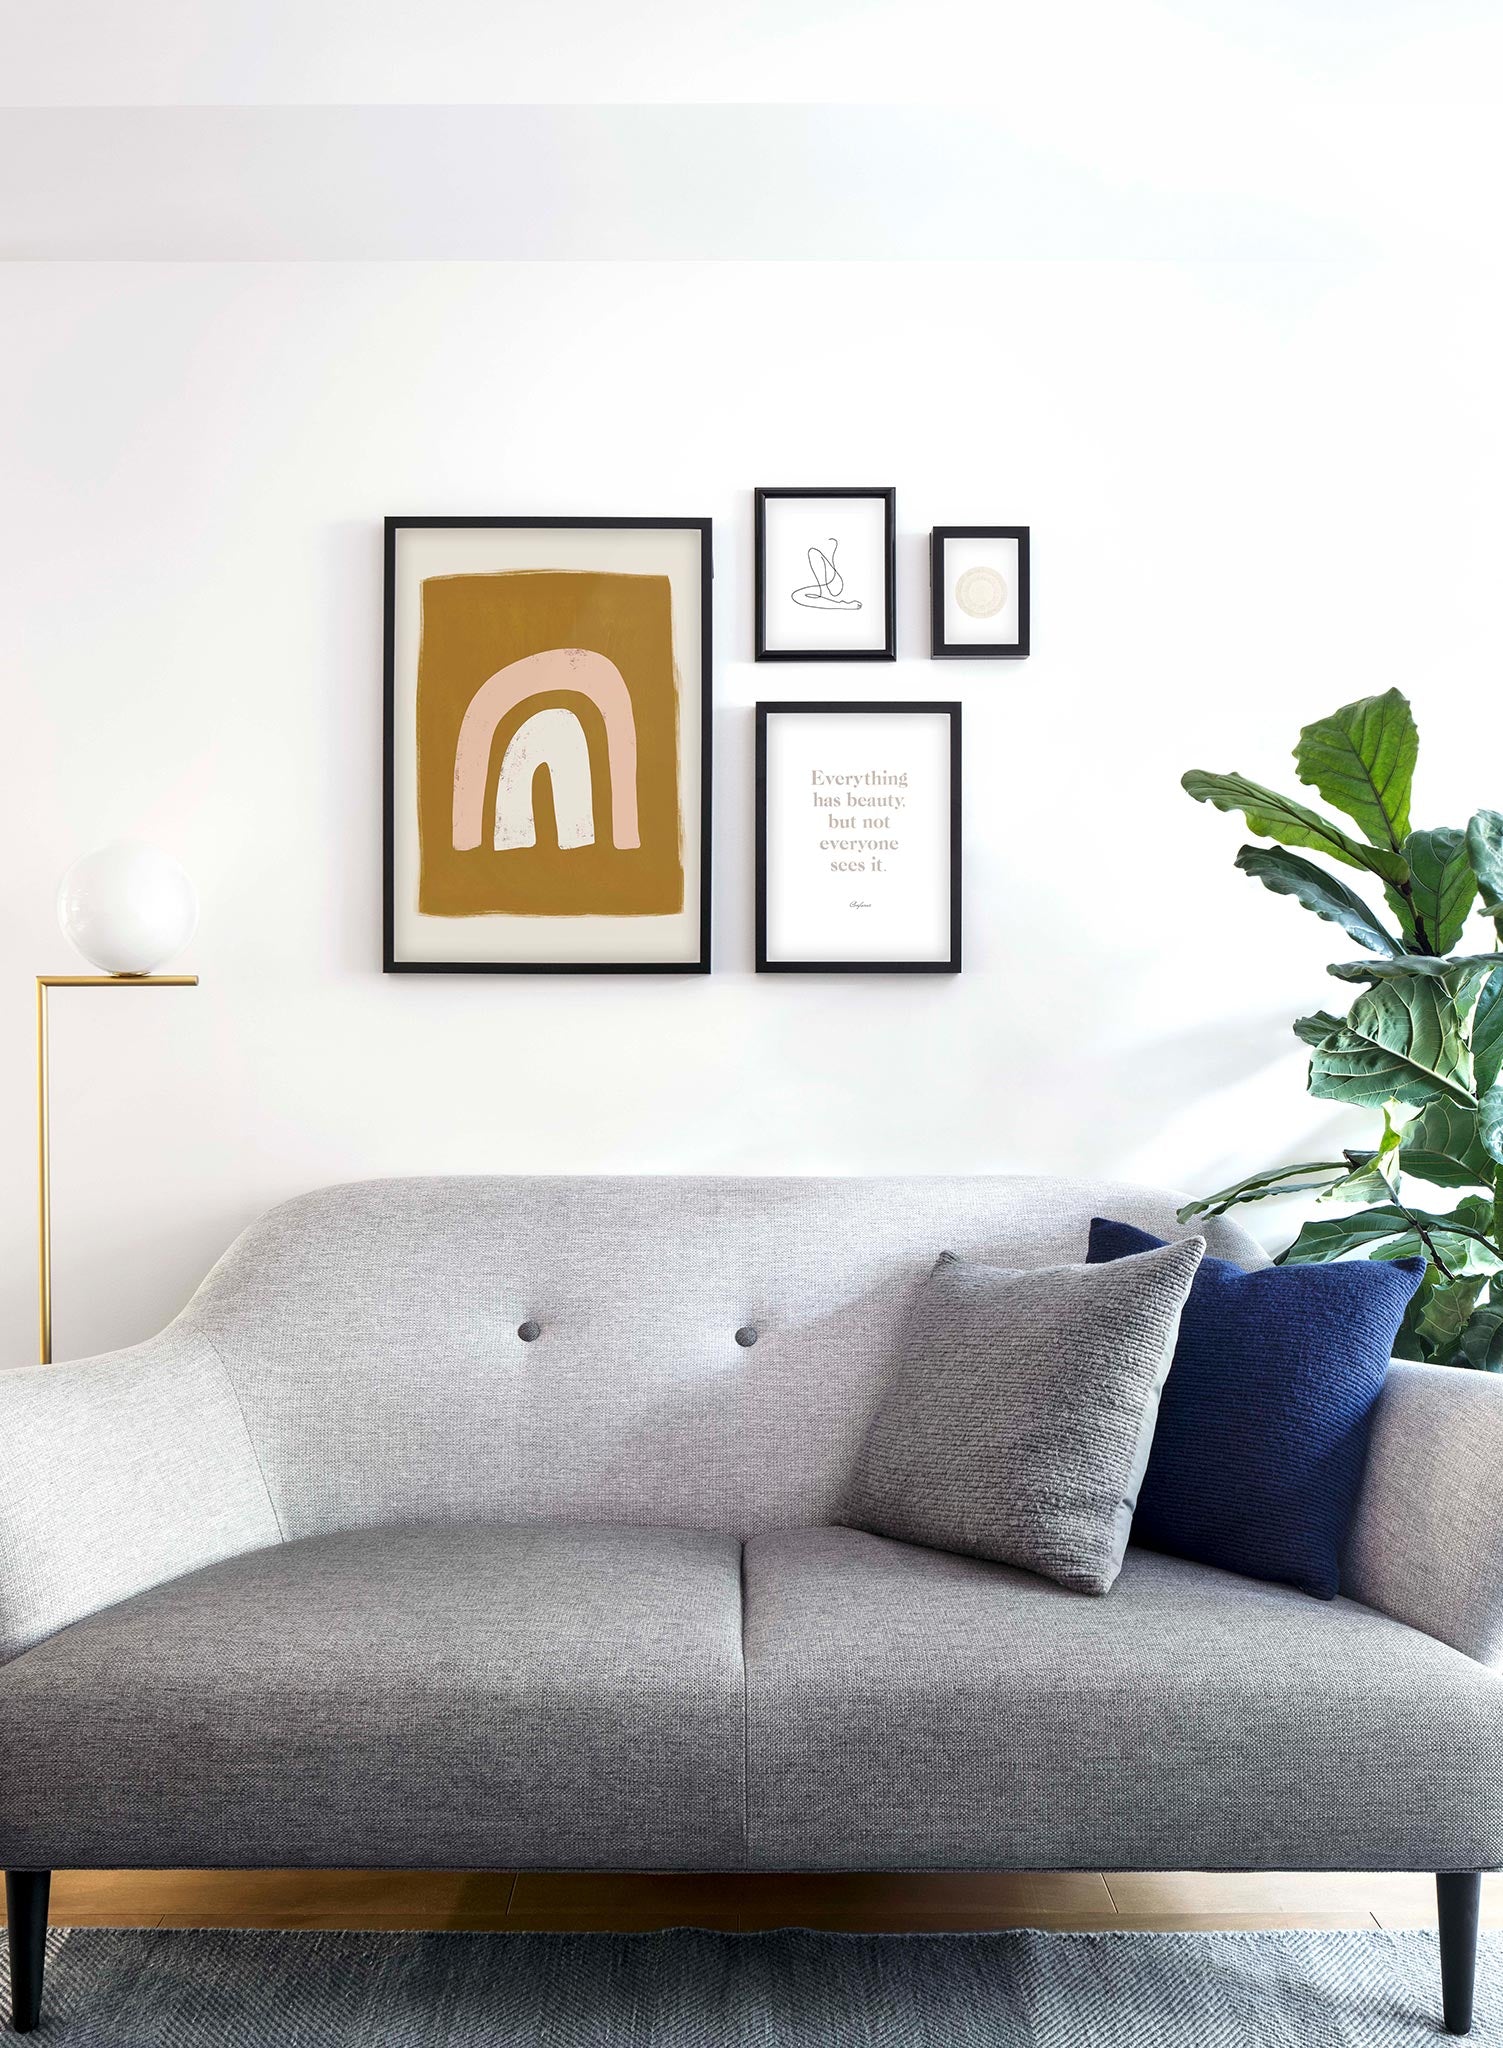 Modern abstract illustration poster by Opposite Wall with rainbow tunnel shape by Toffie Affichiste - Lifestyle Gallery - Living Room